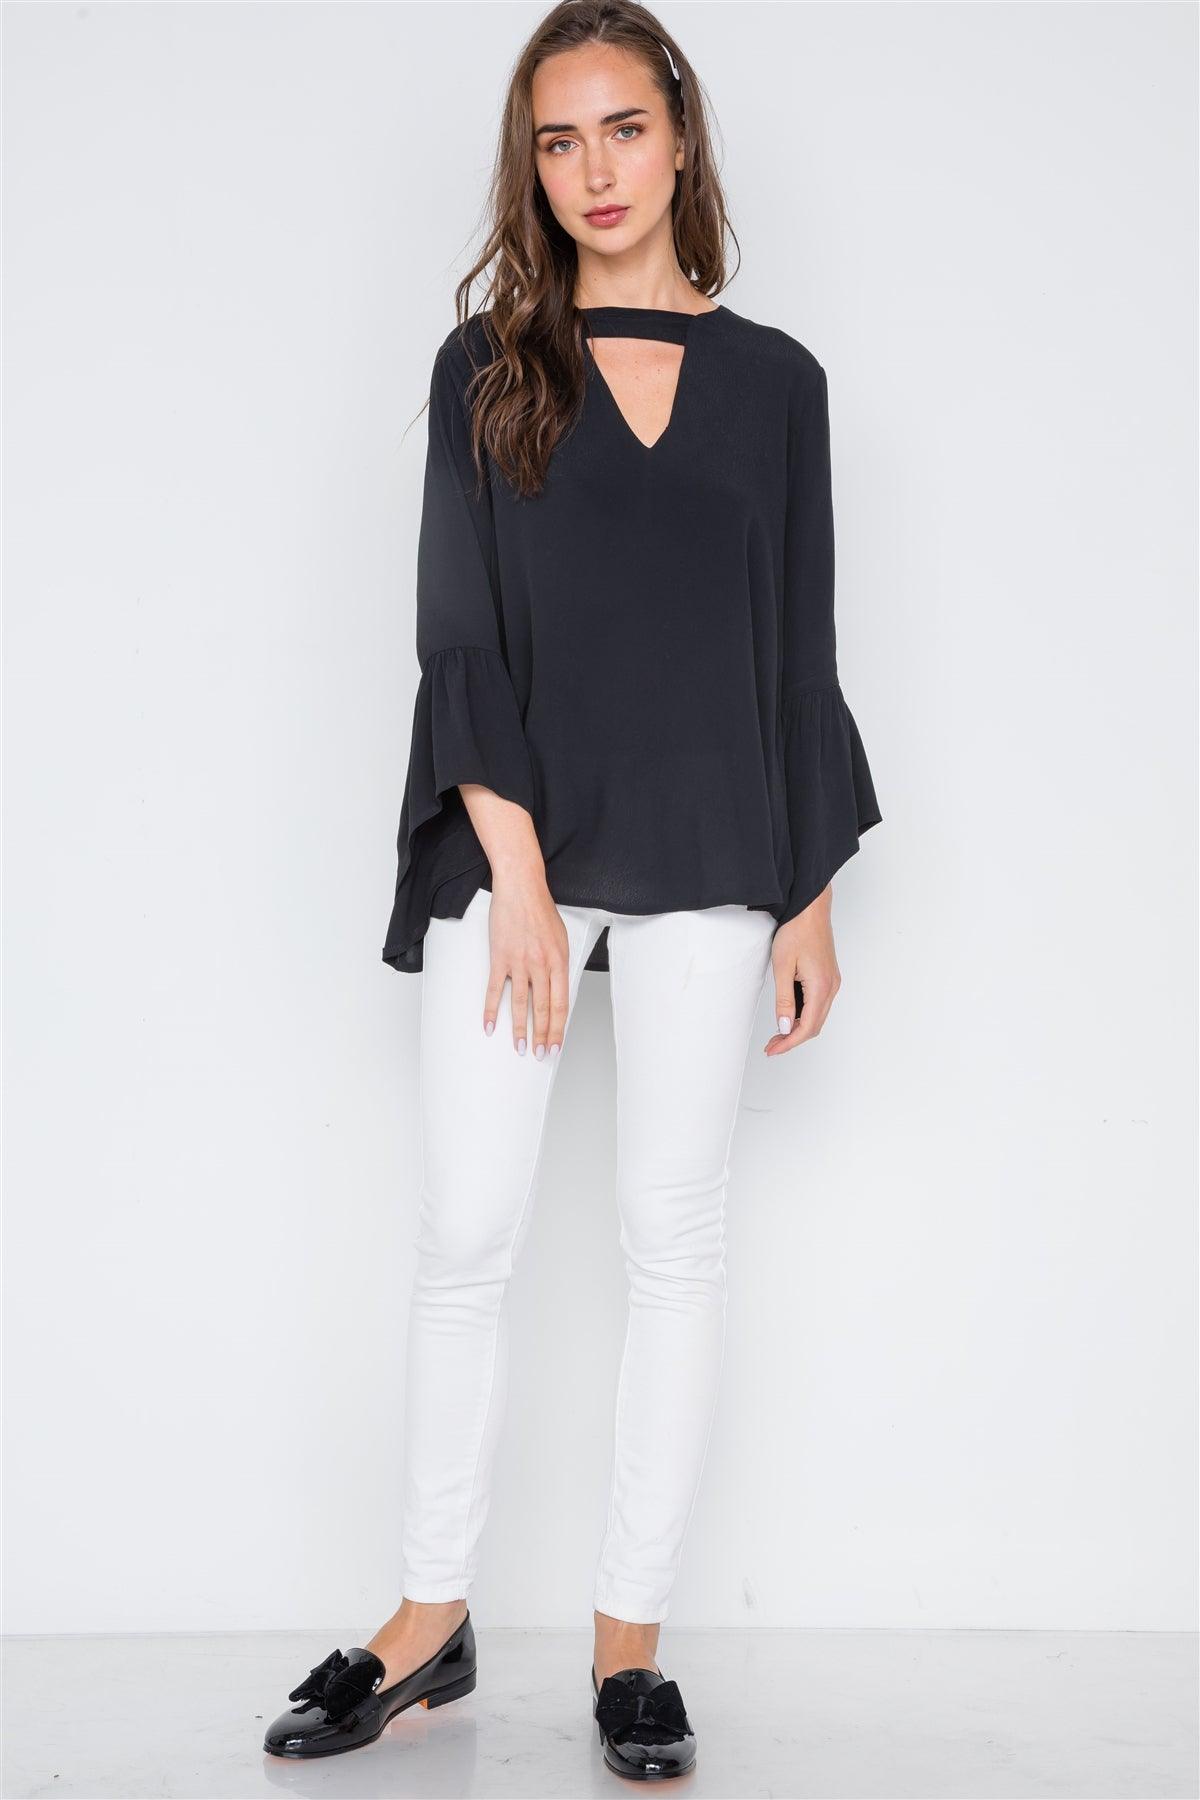 Black V-Cut Out Long Bell Sleeve Solid Top /2-2-2